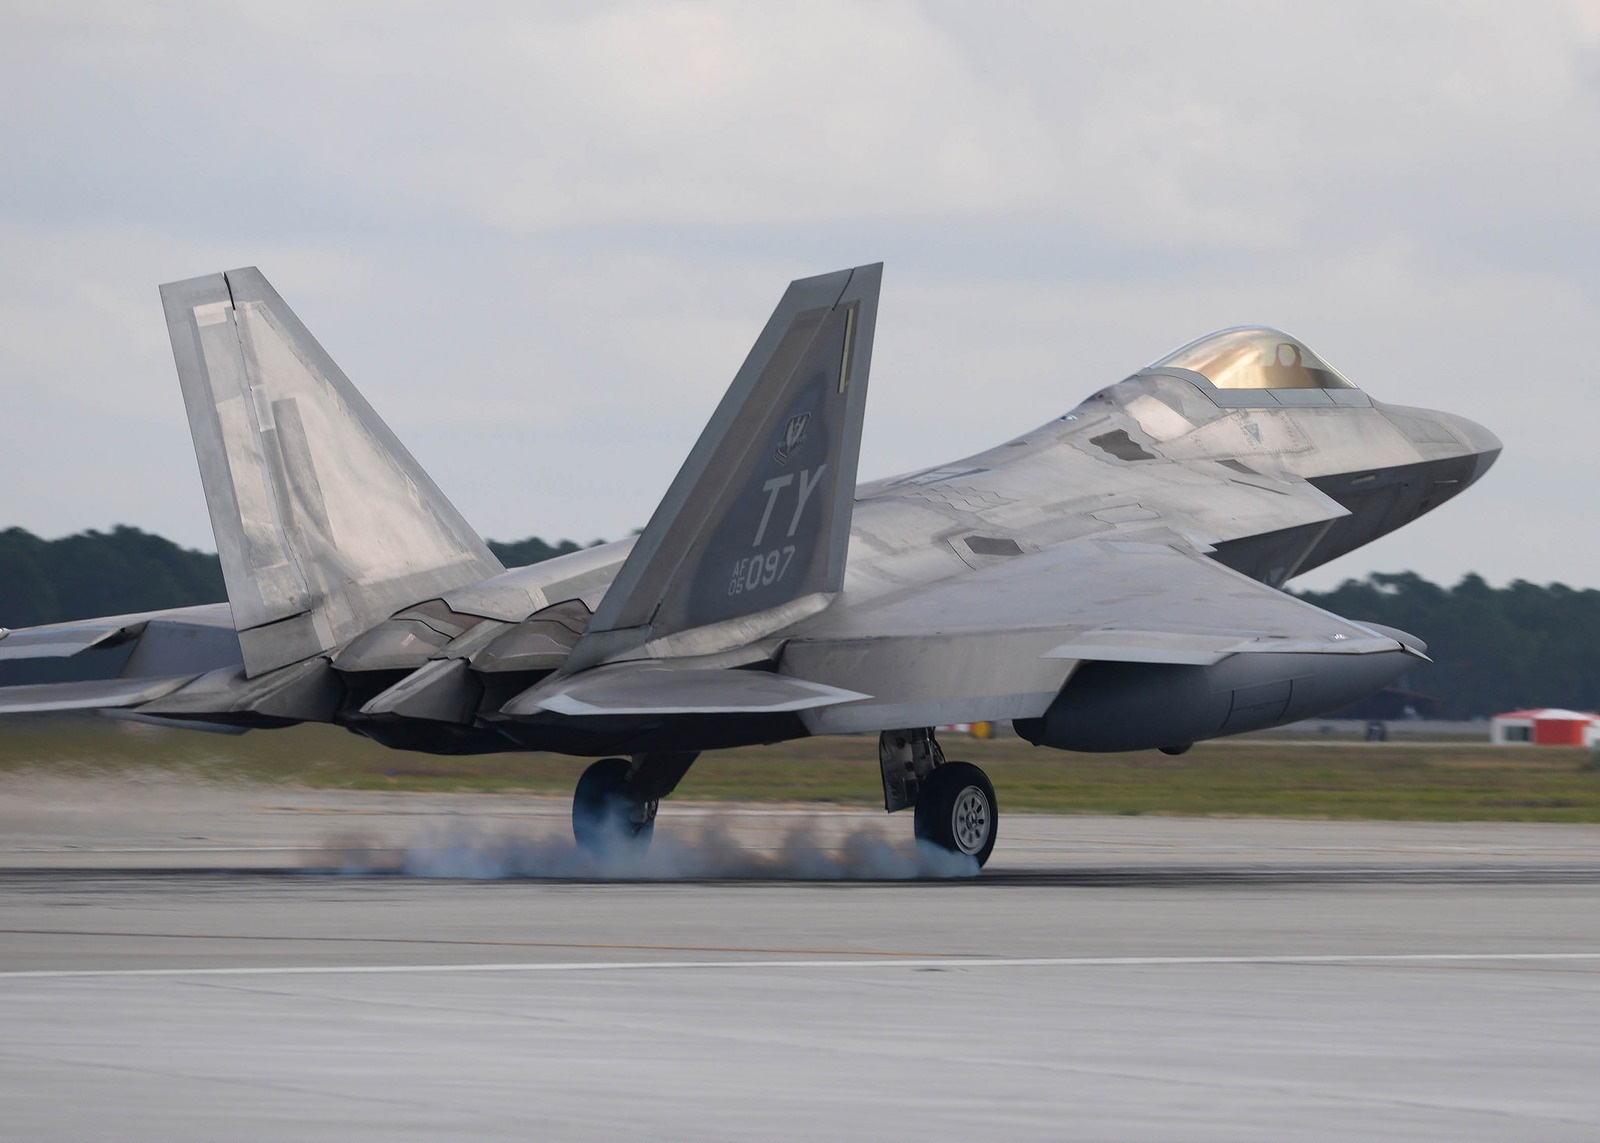 The U.S. Air Force Cannibalized an F-22 Raptor Squadron